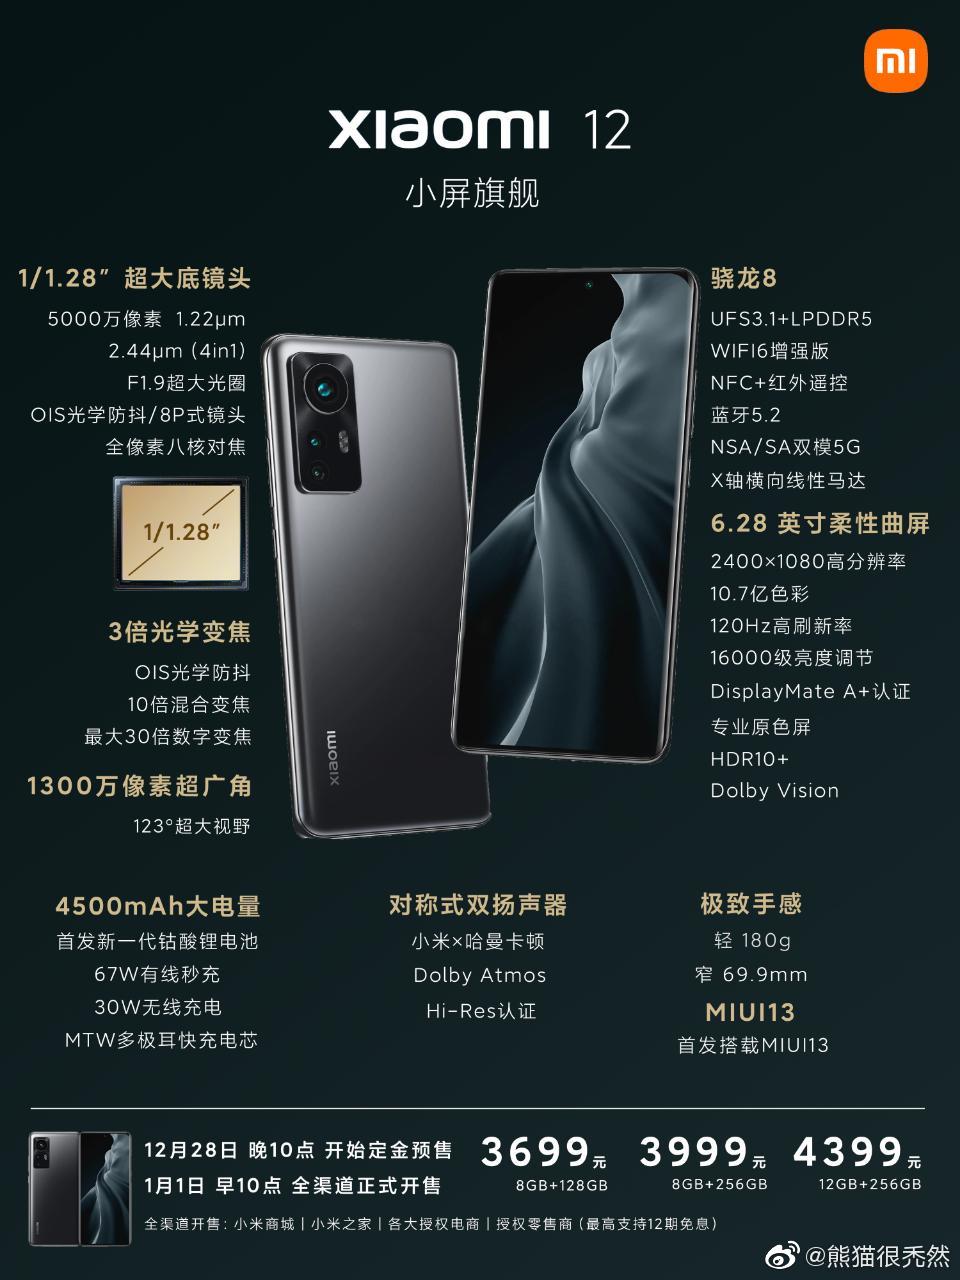 Xiaomi-12-poster-with-specs-pricing.jpg